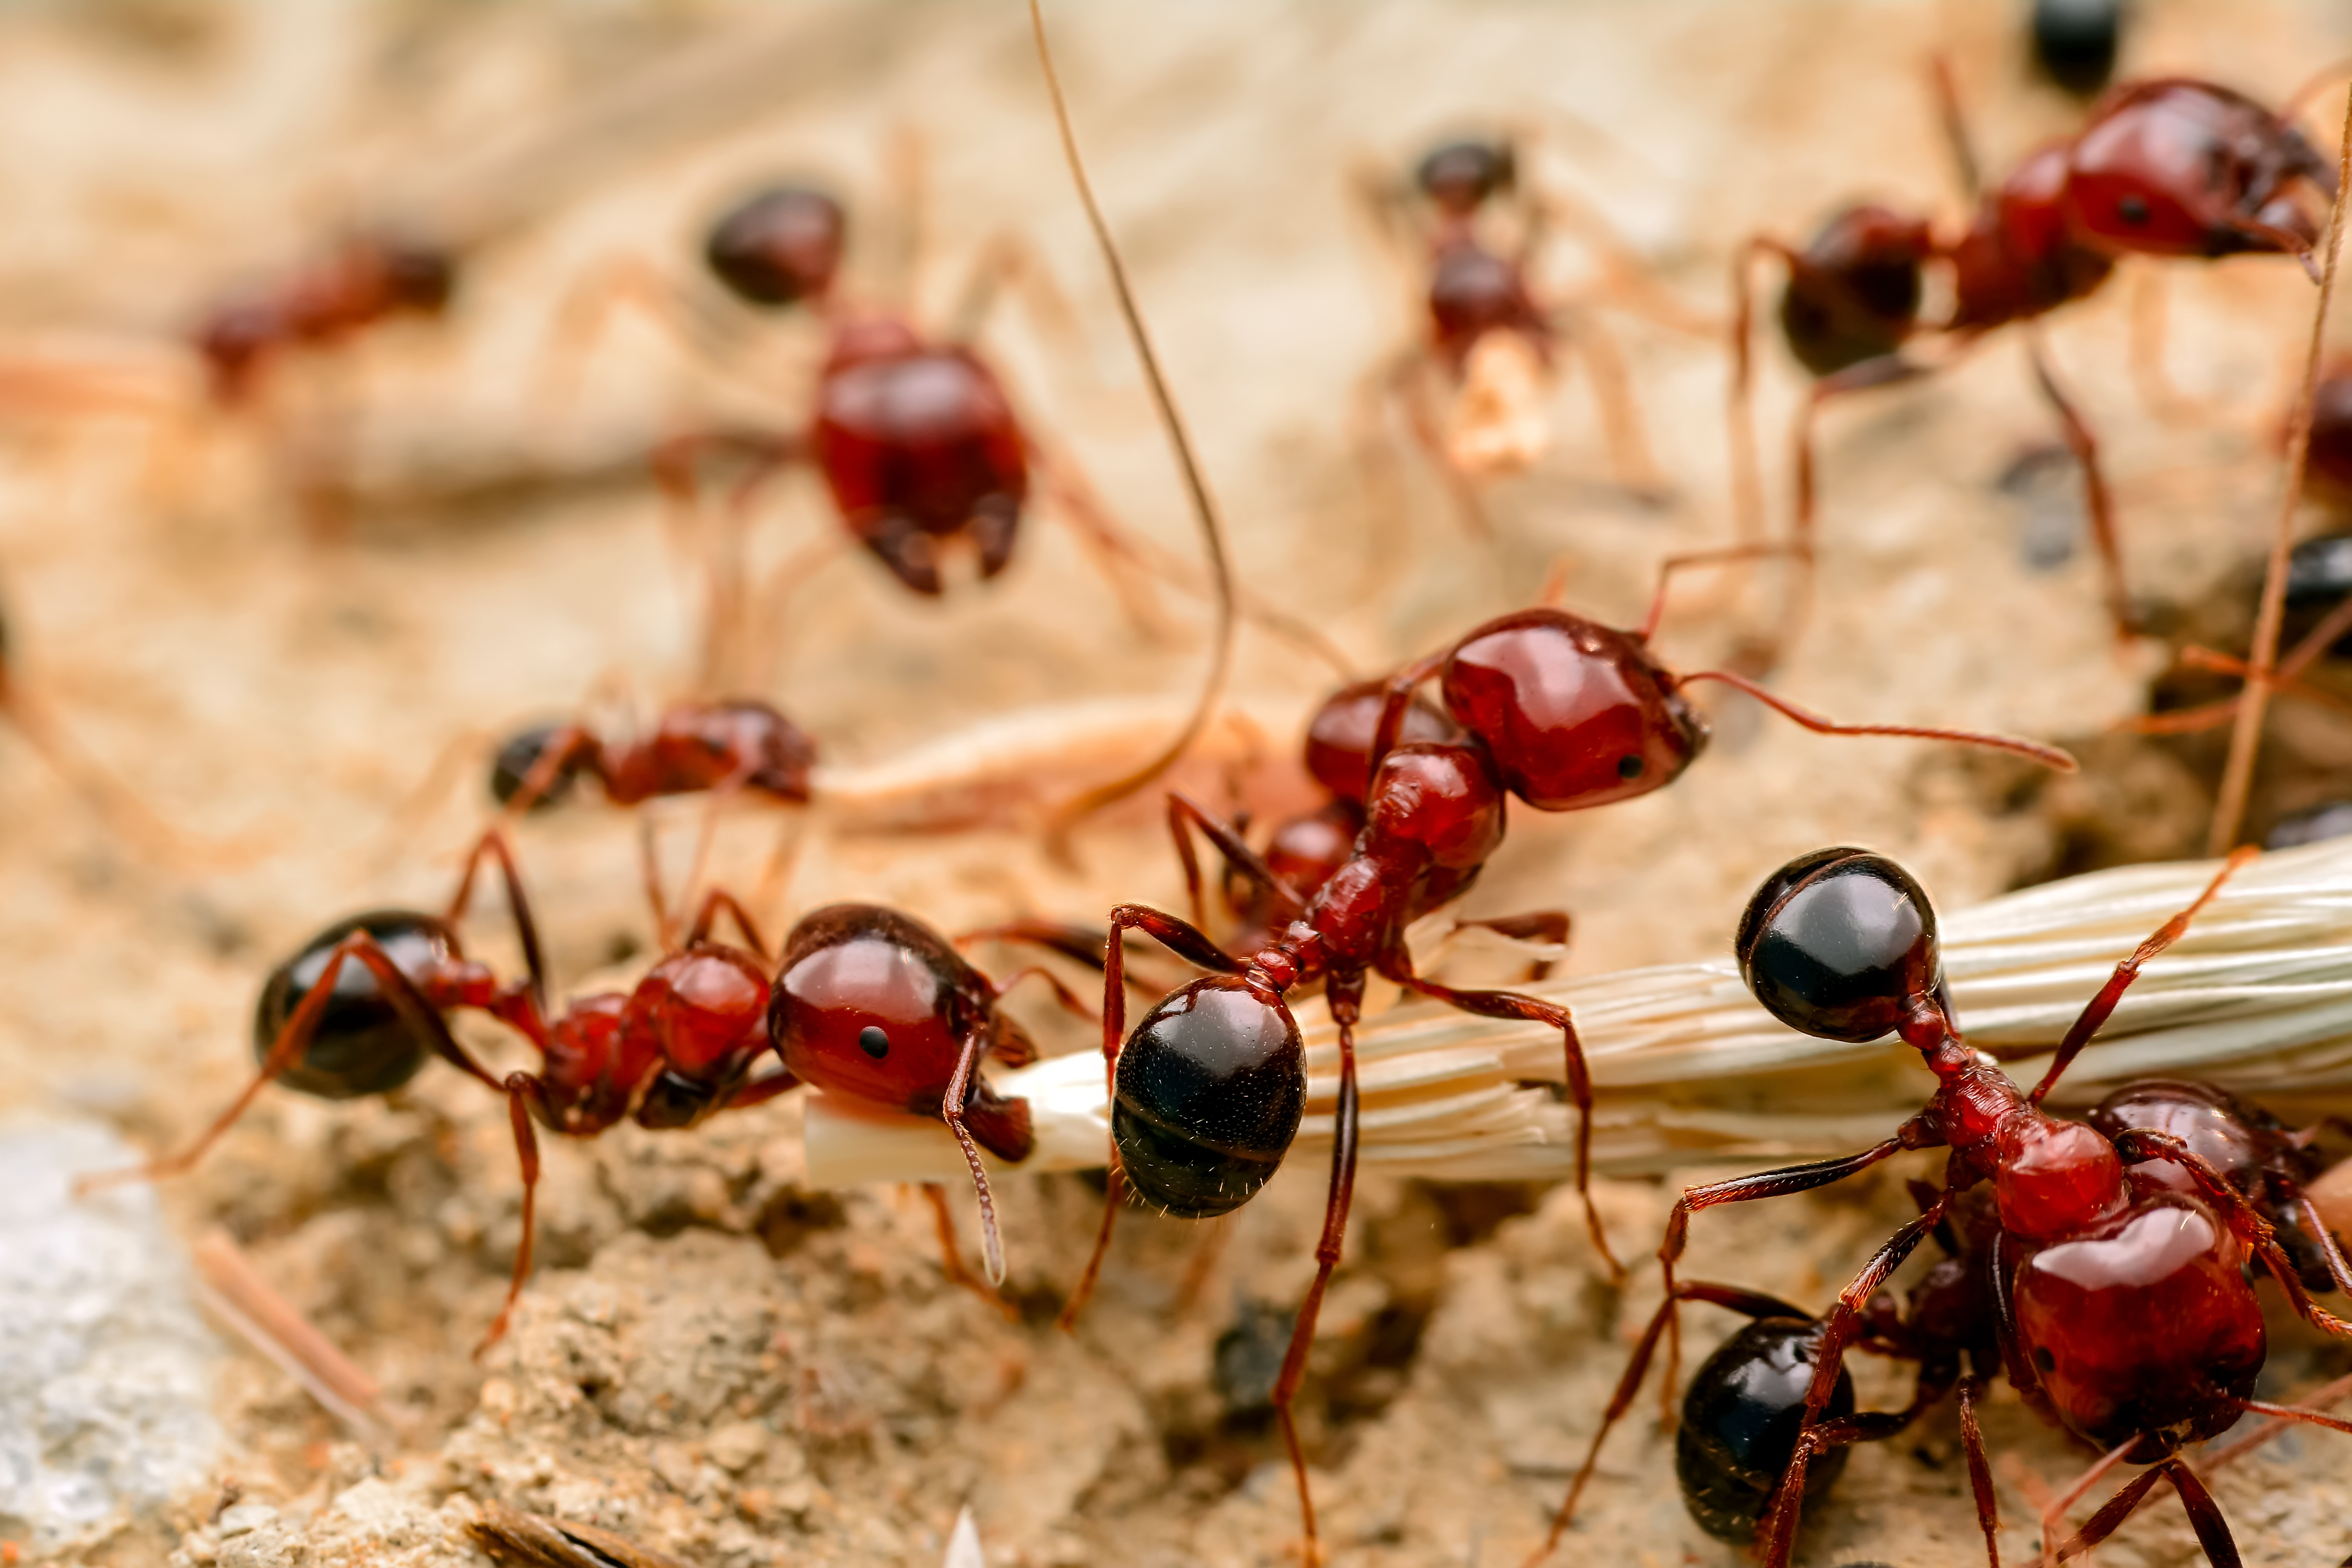 A closeup image on fire ants and their strong pinchers - learn how GGA Pest Management can help with our fire ant control in Waco, TX.